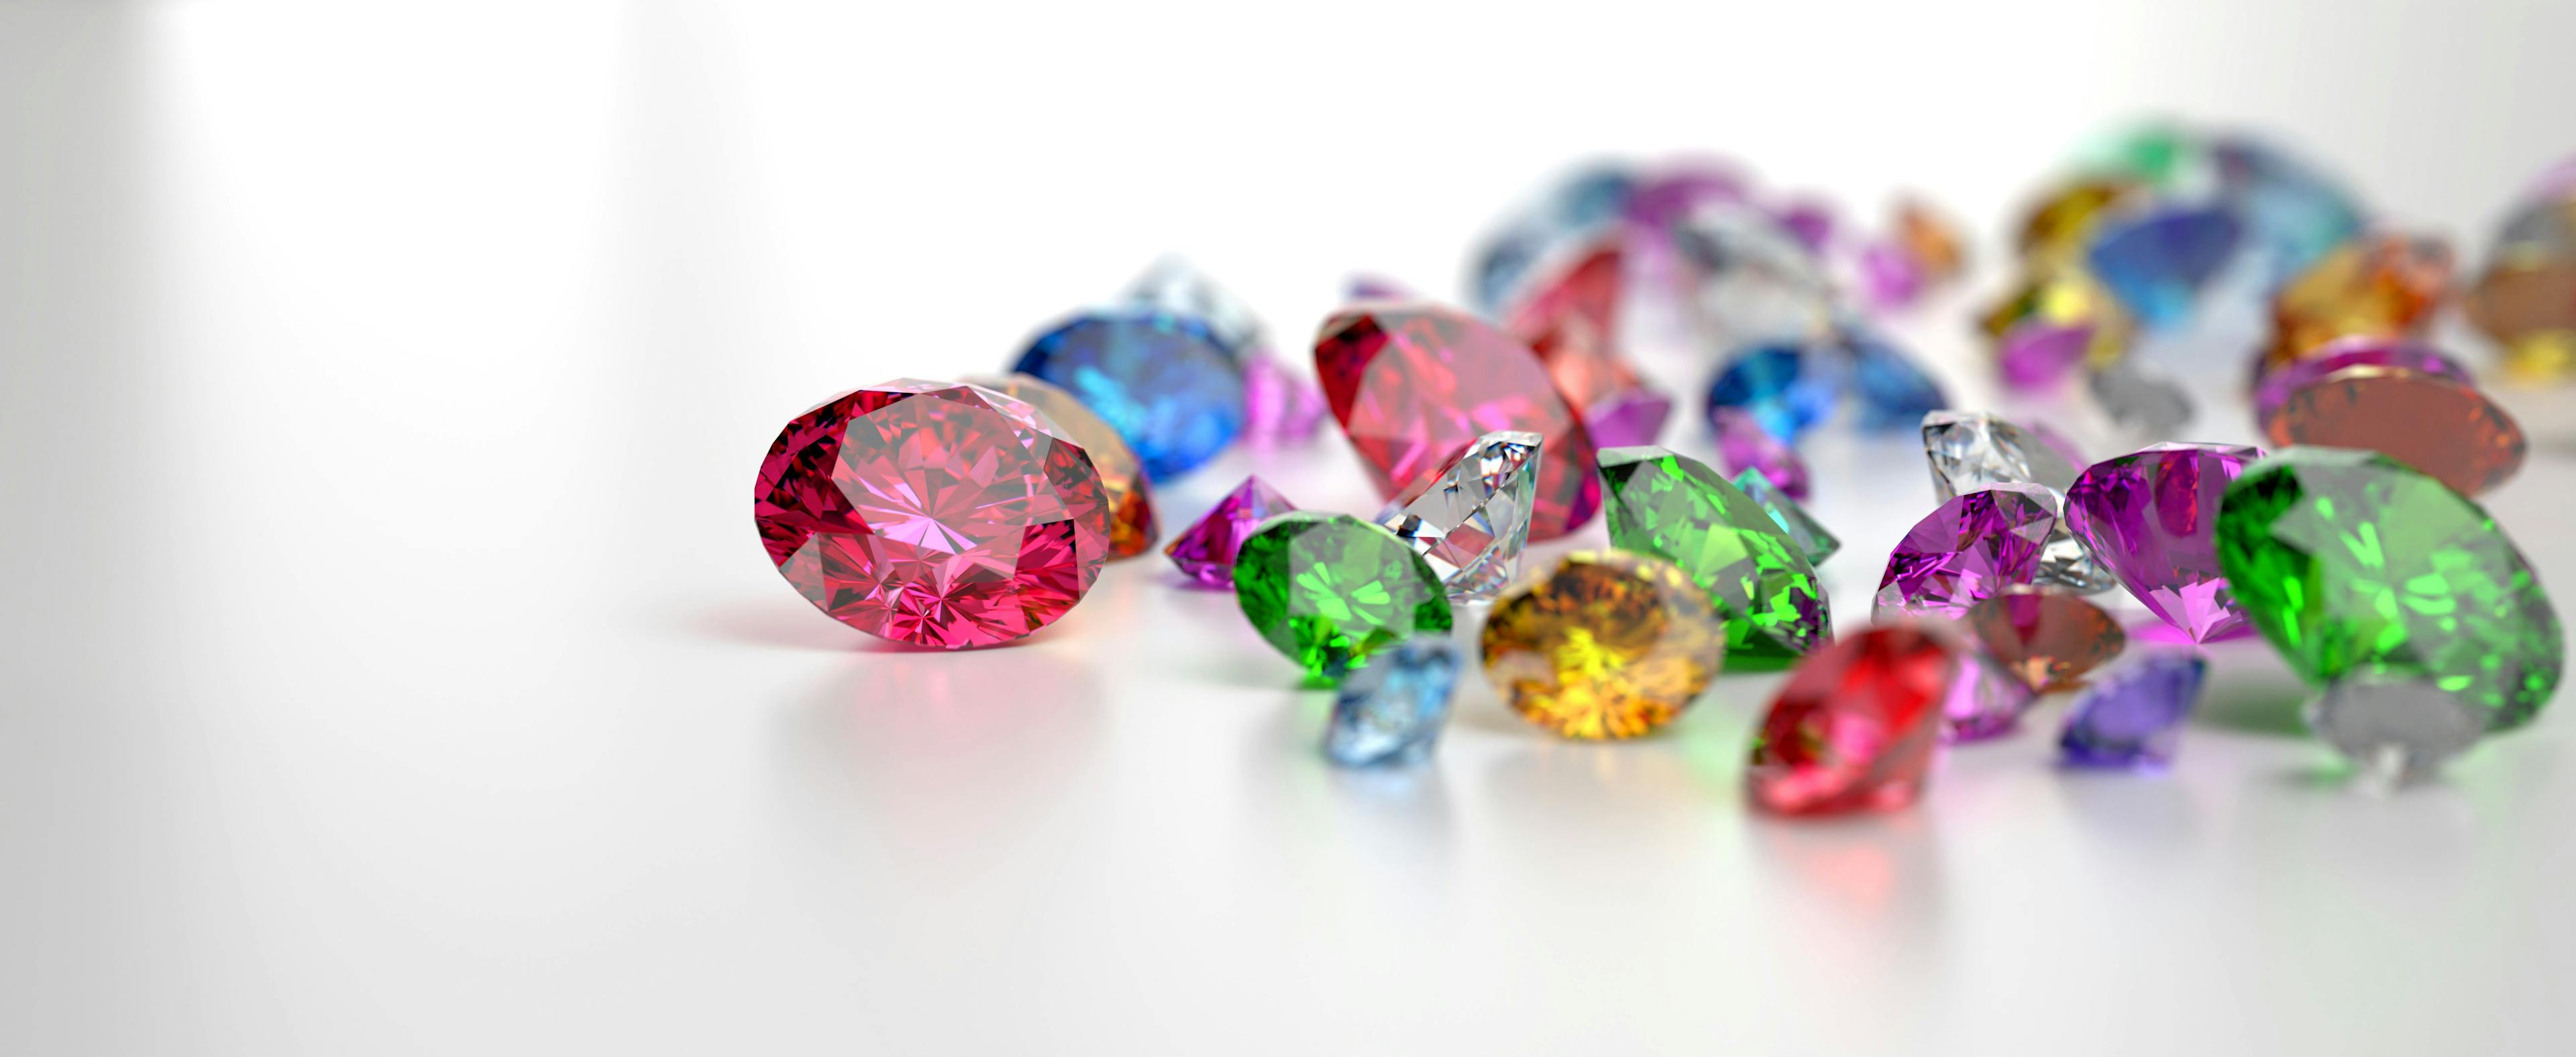 Colorful Gemstones placed on white reflection background, 3d rendering. | Image Credit: © sarawut795 - stock.adobe.com